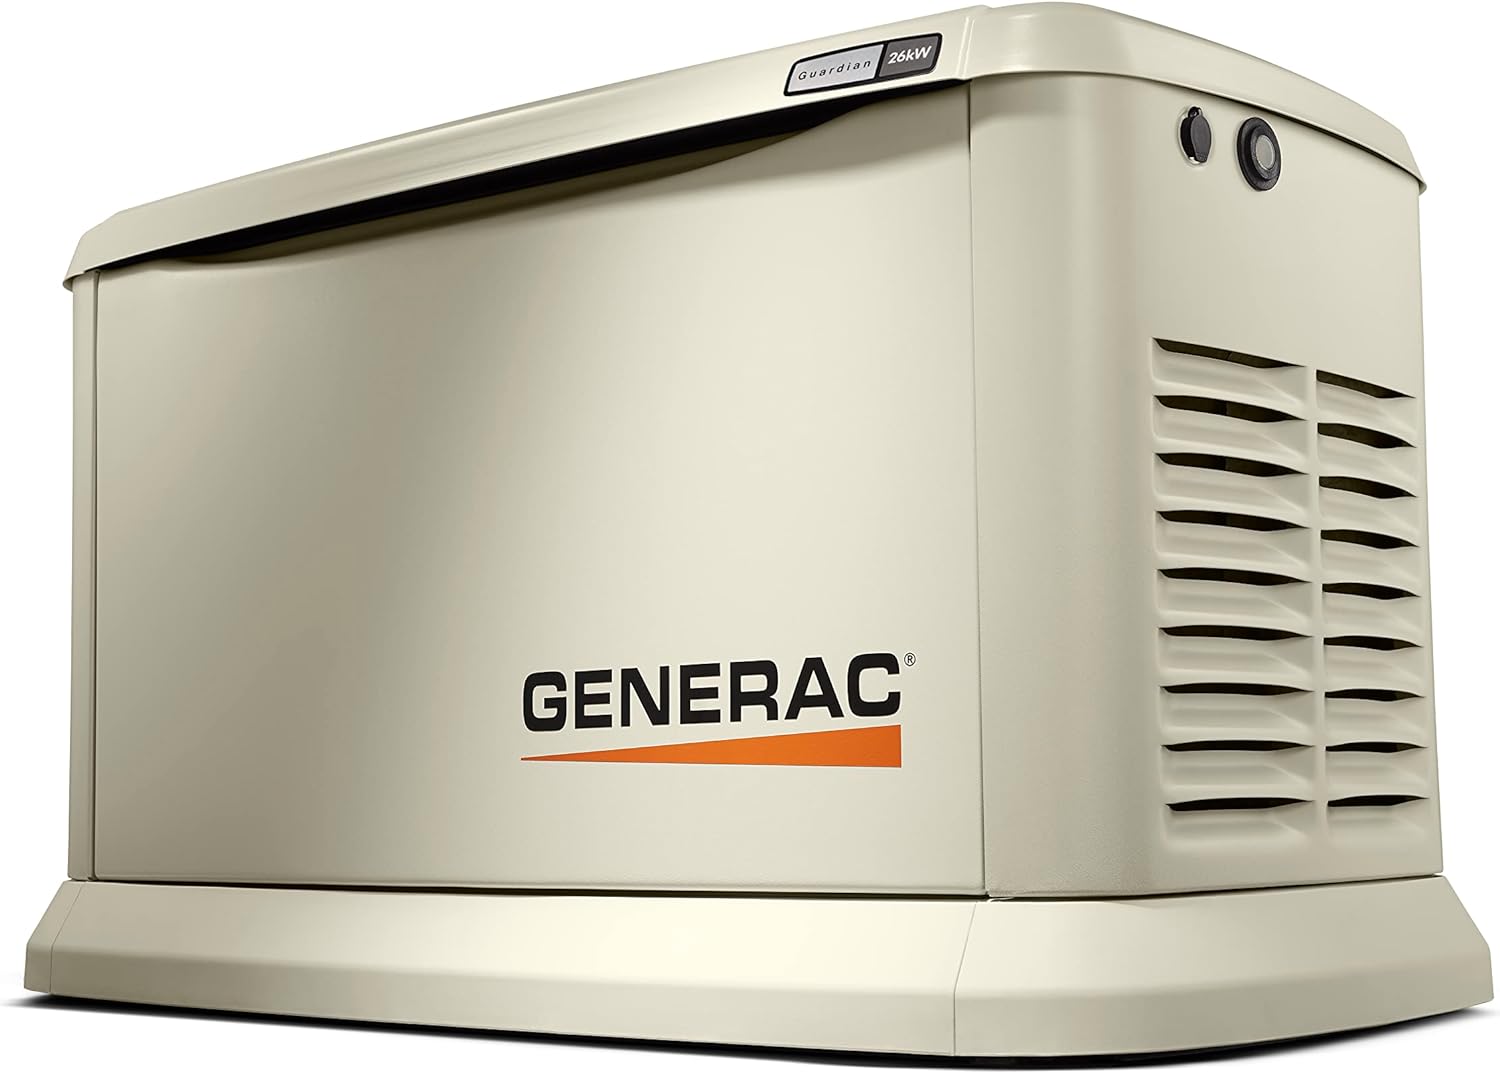 Generac 7290 Guardian Series: The Powerhouse of Home Standby Generators - 26kW of Reliable, Smart Power